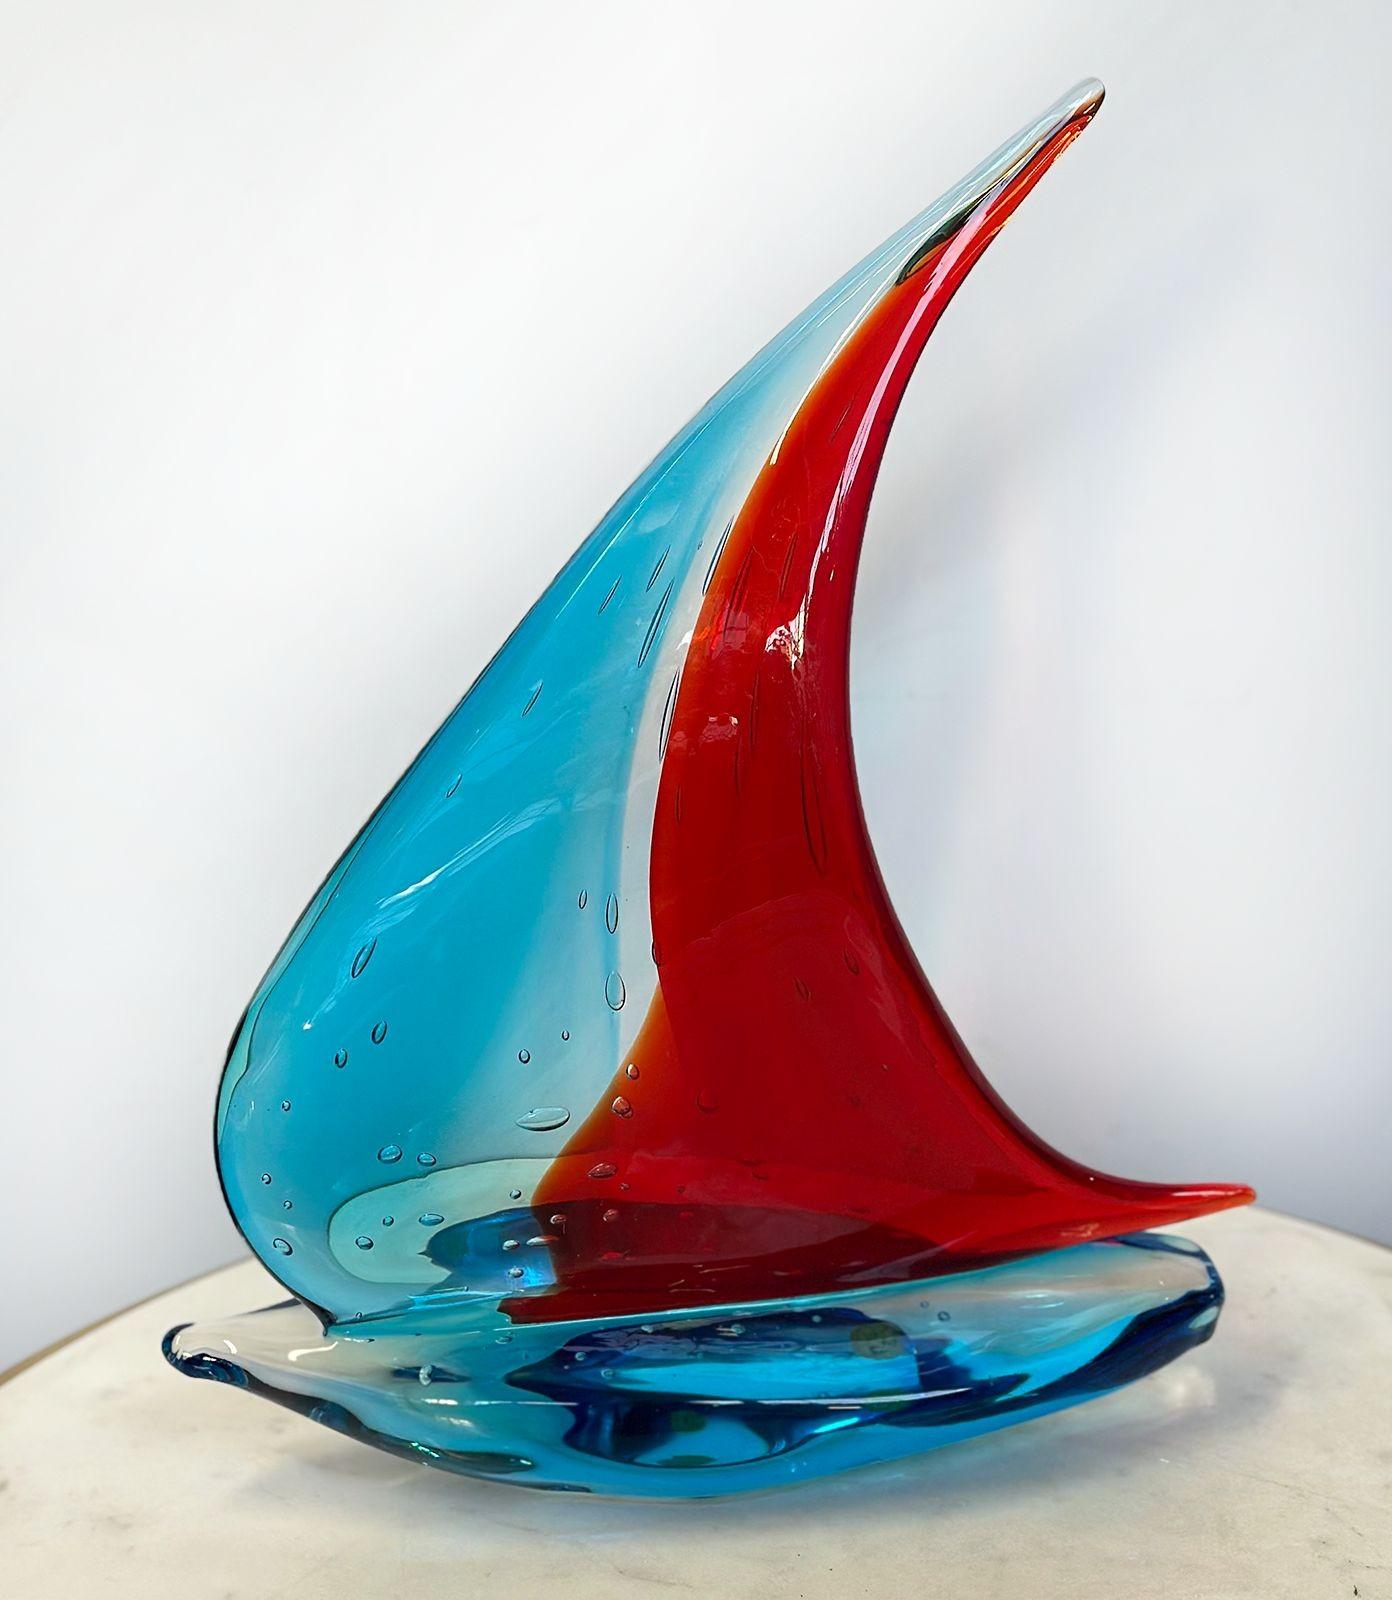 Vintage Italian handblown Murano glass sailboat sculpture with Vetro Artistico®Murano mark sticker and signed Sergio Costantini. This fantastic collectible sculpture stands out for its bright red and blue tones, as well as its unique abstract